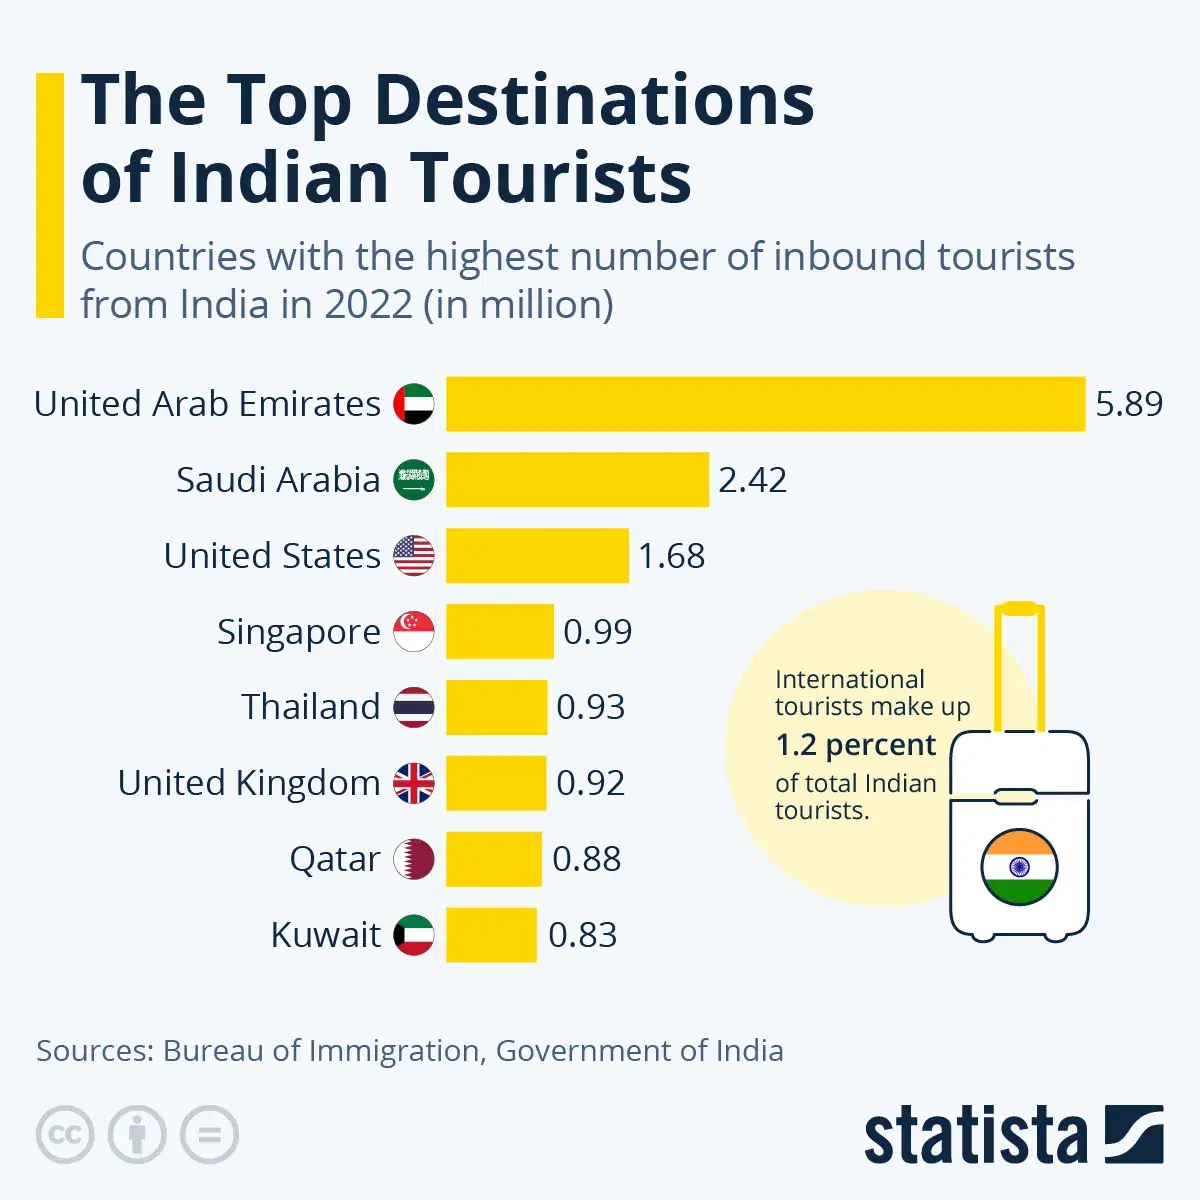 The Top Destinations of Indian Tourists